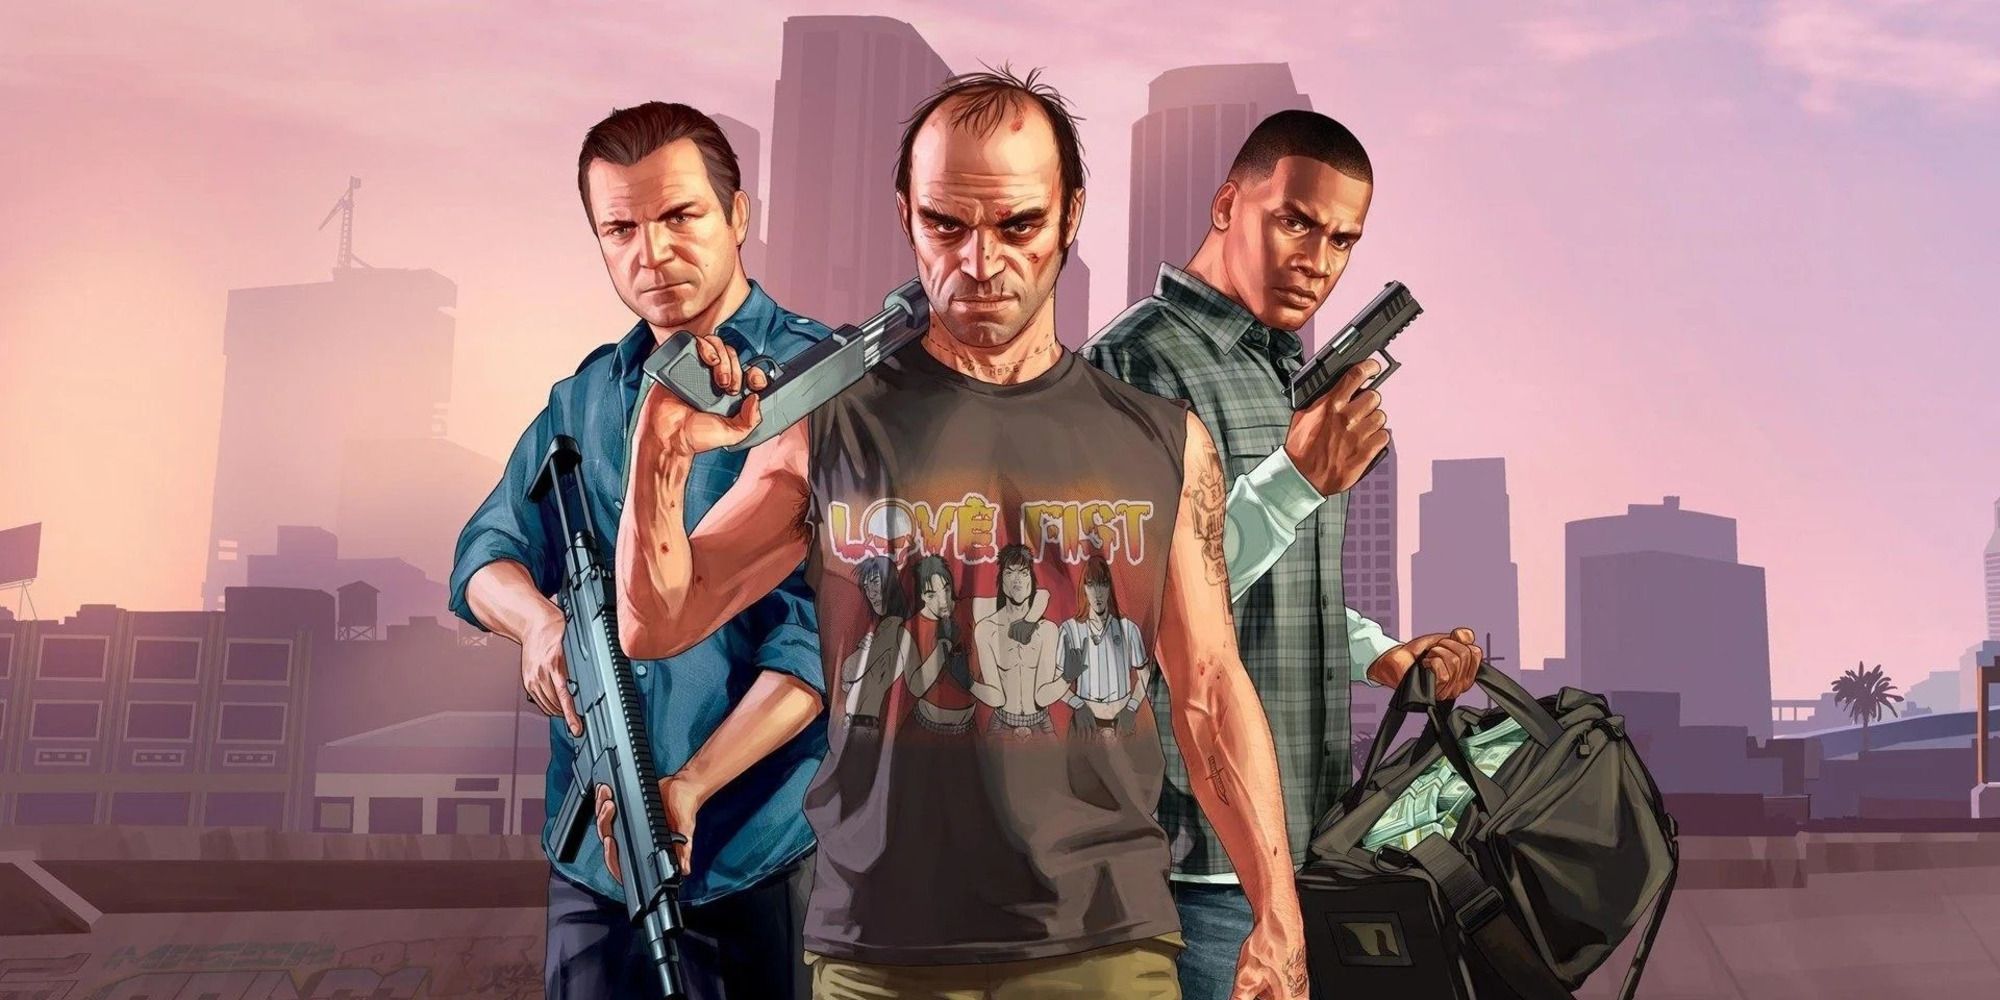 Promotional artwork for GTA 5 depicting all the main characters.